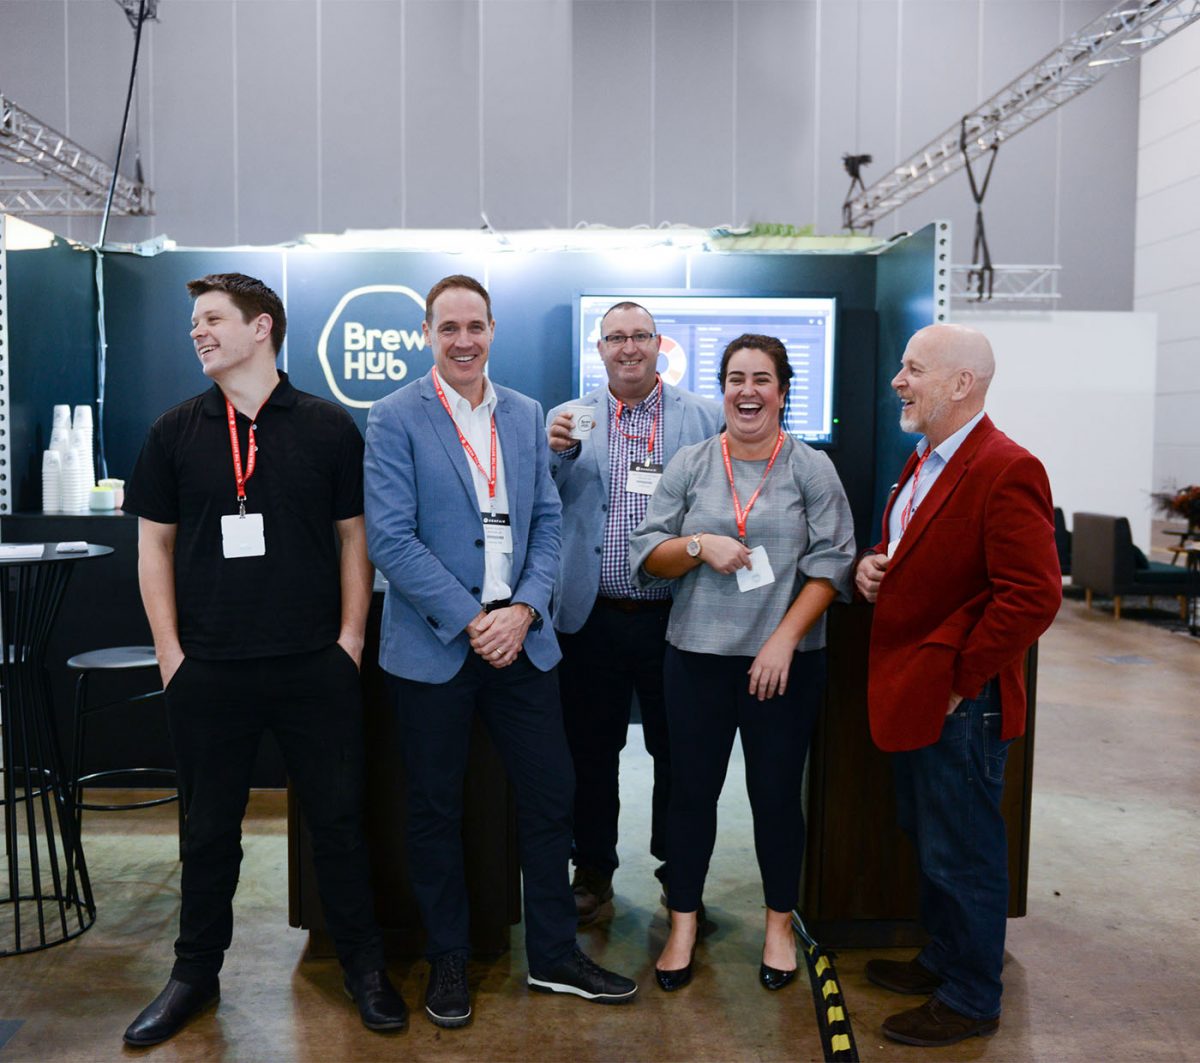 BrewHub team photo after a successful conference showcasing our Coffee Machines and services.